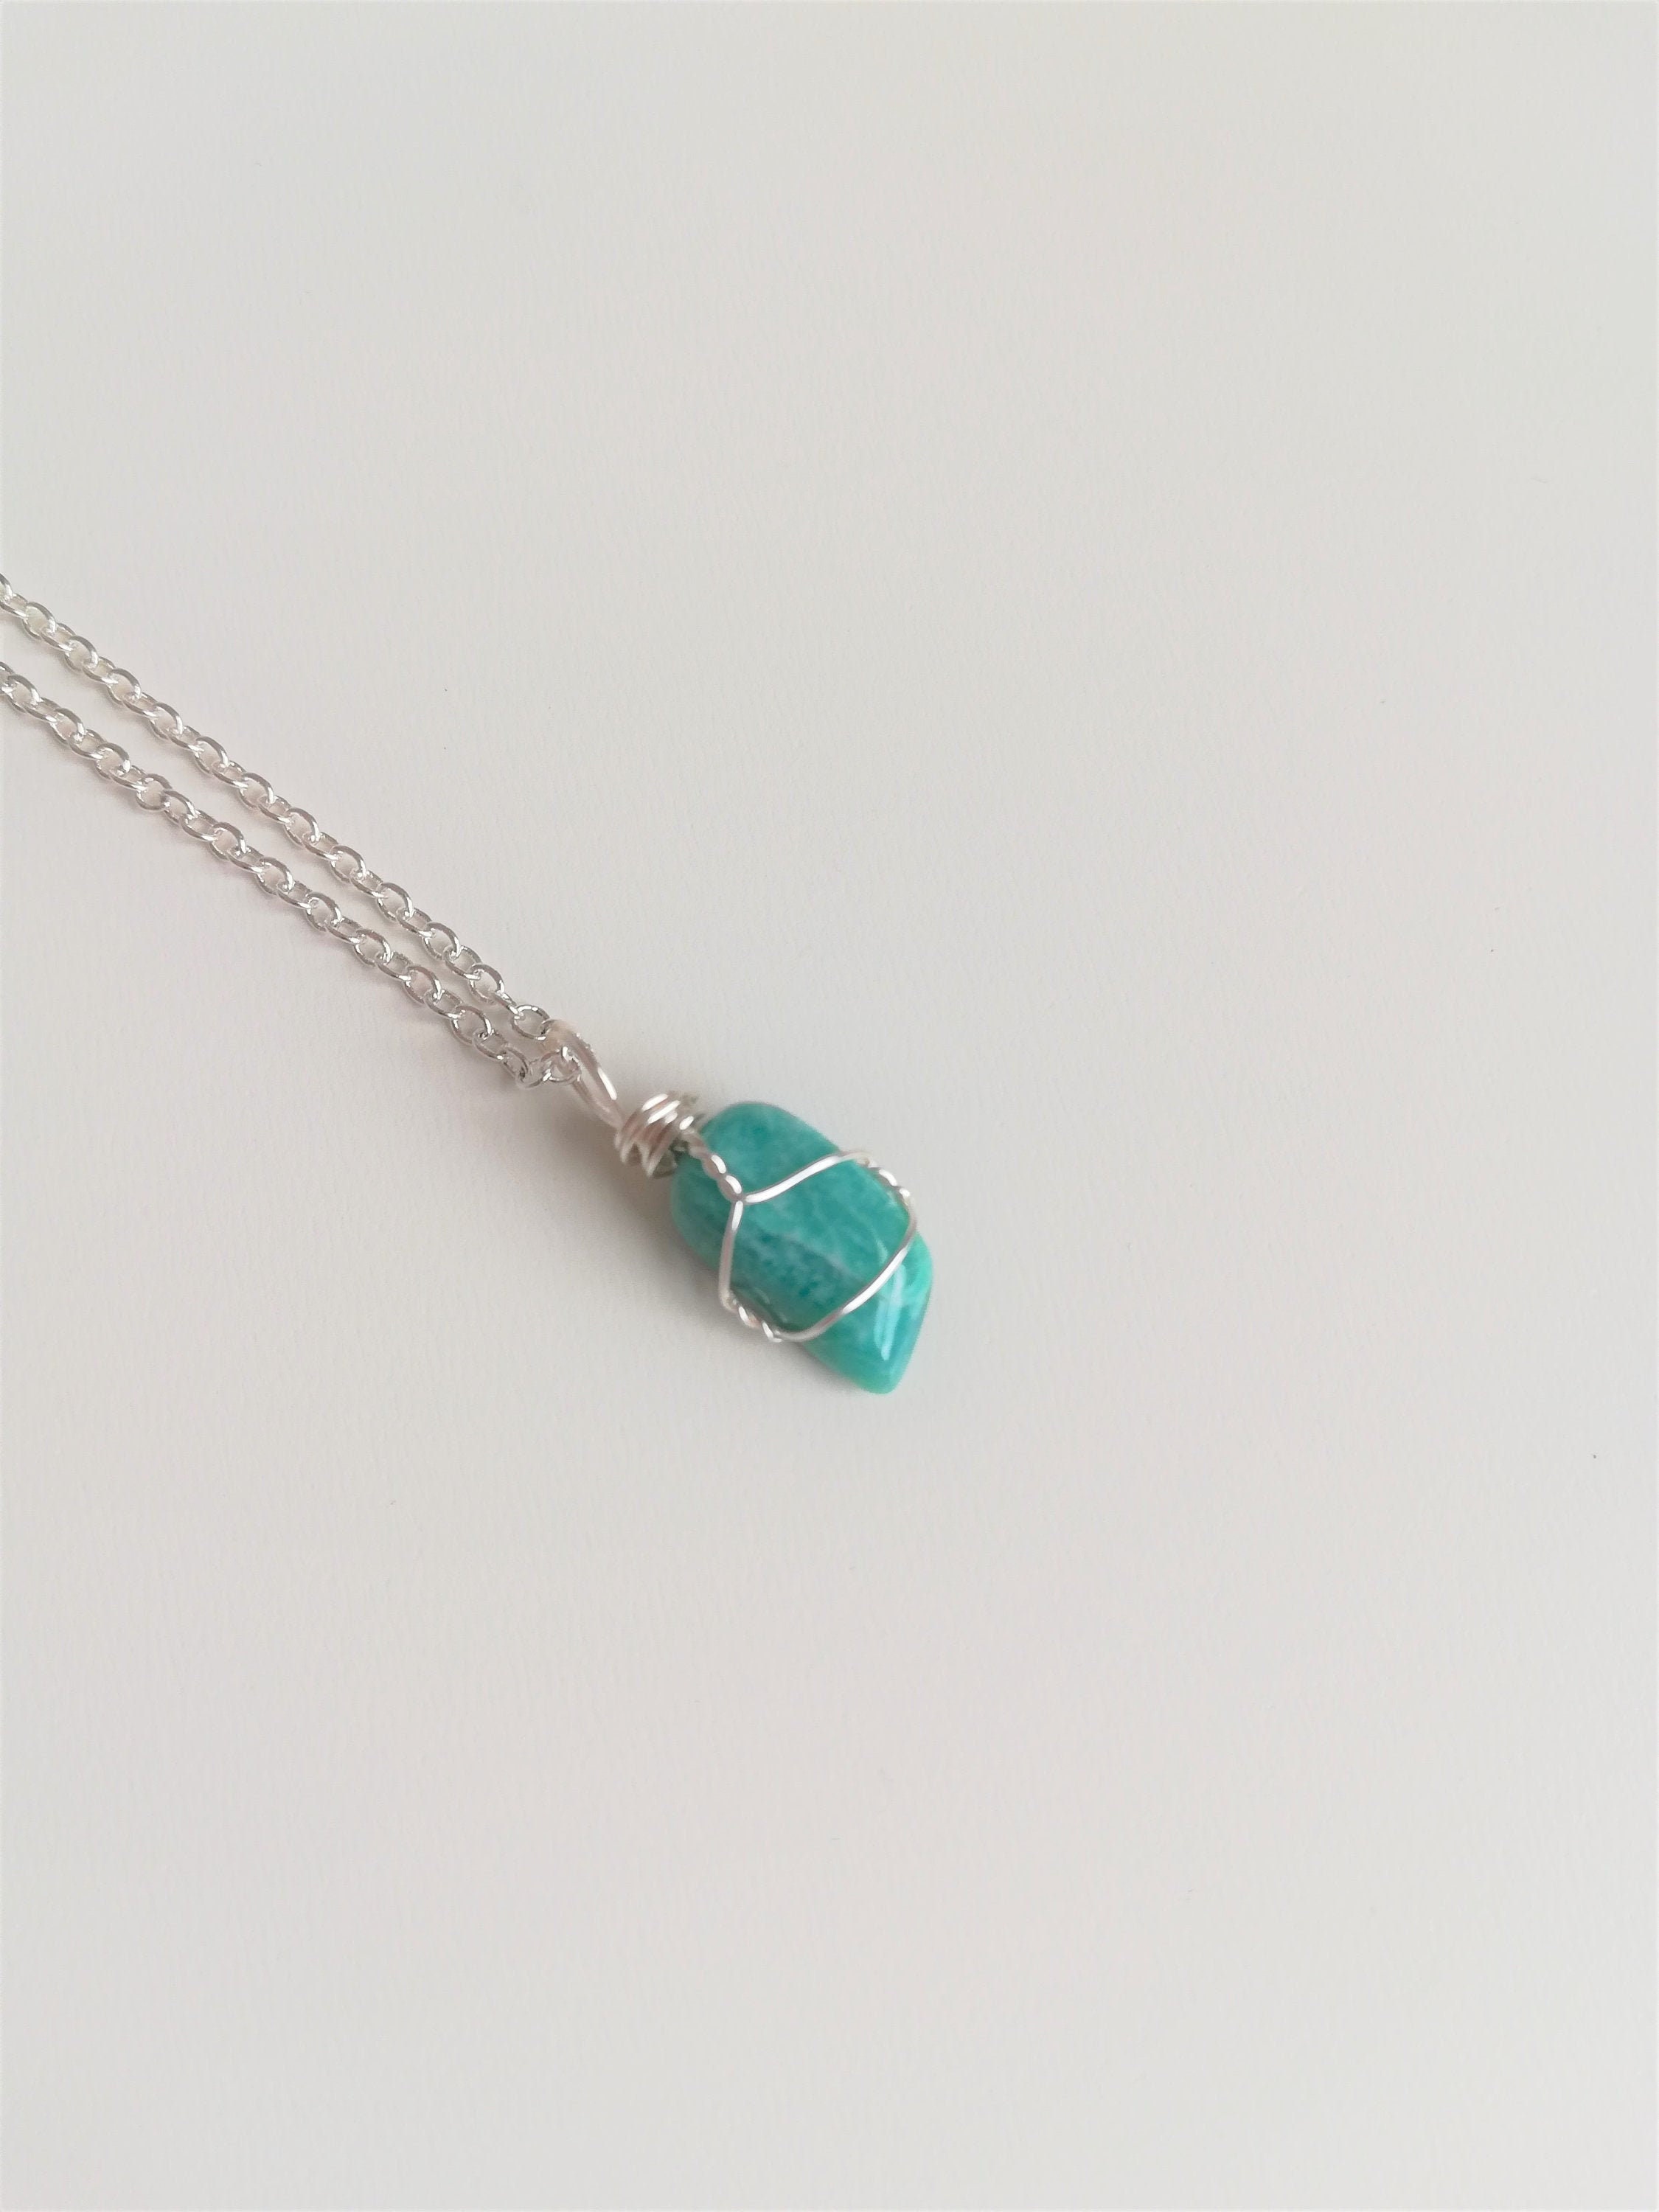 Amazonite Crystal Necklace Pendant Small Handmade Blue Stone Inner child Joy Wire Wrapped Affirmations